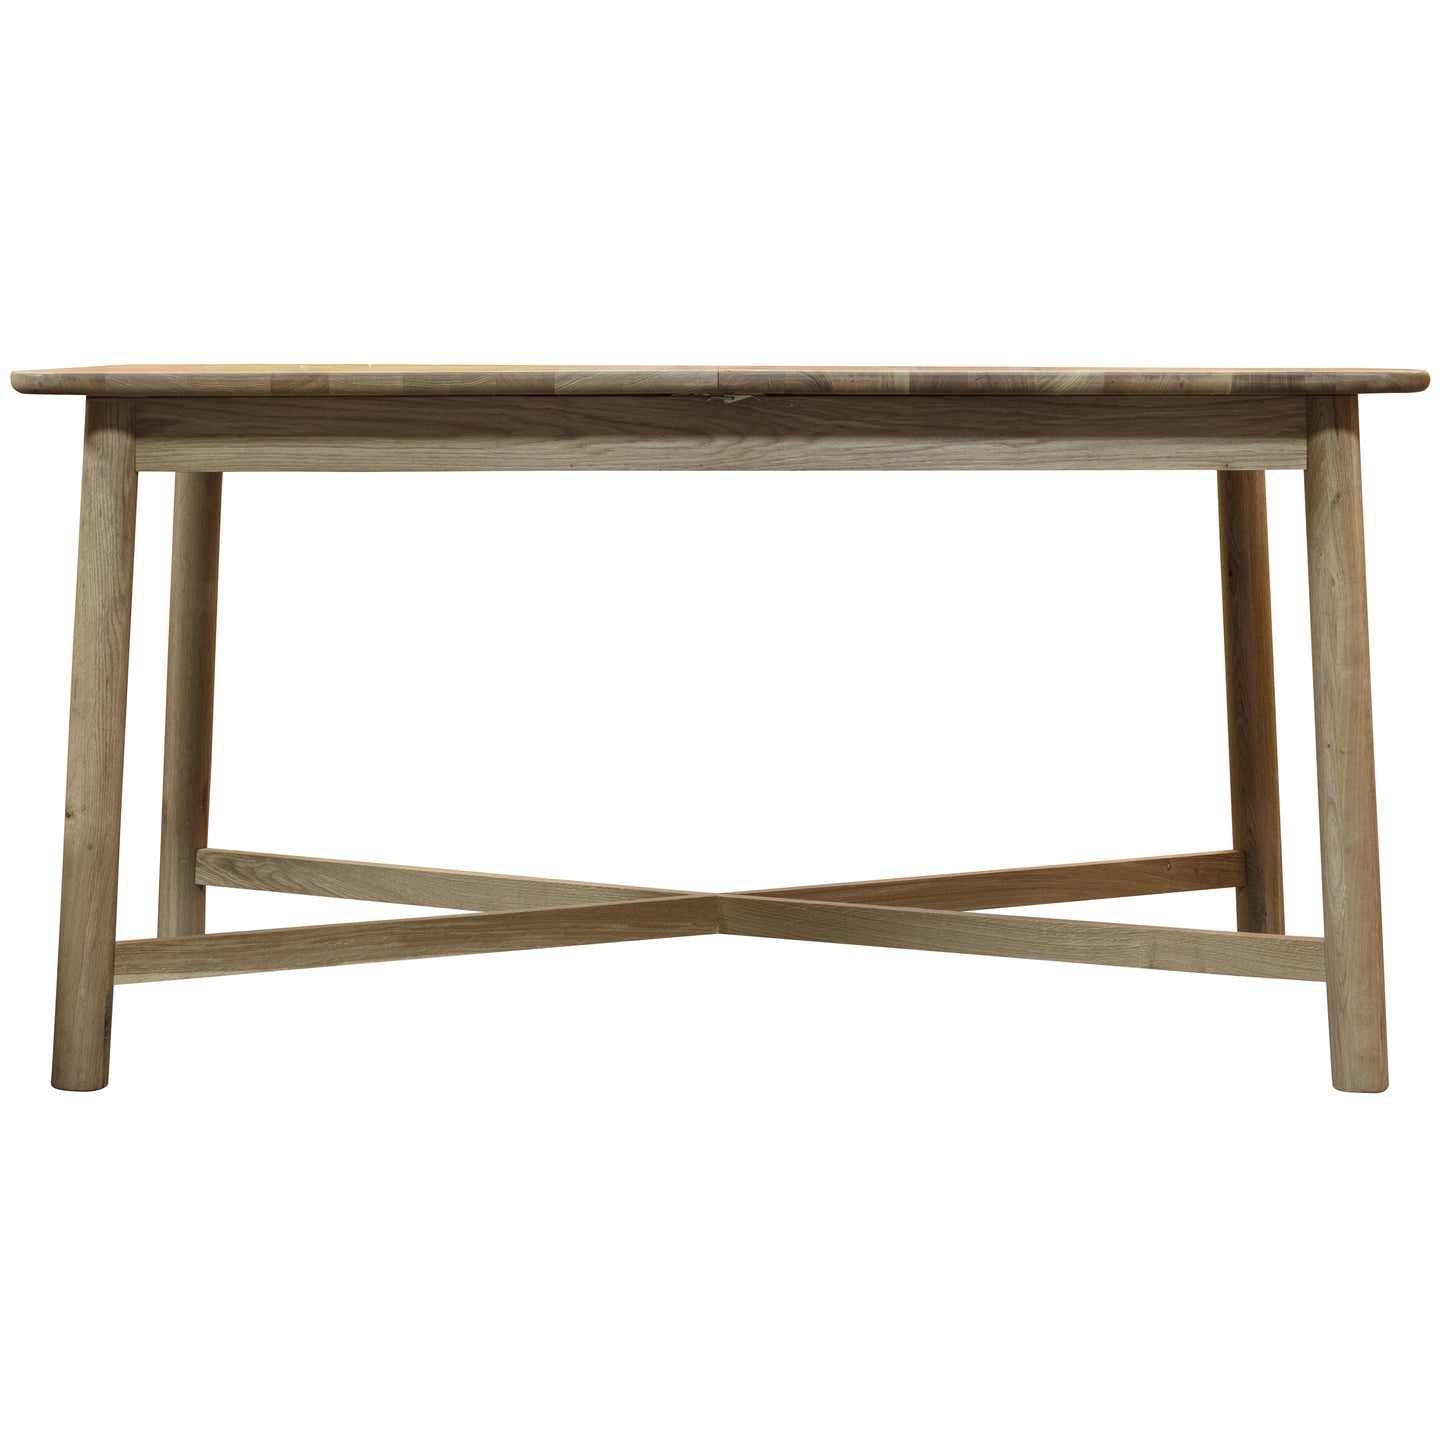 A Wembury Extendable Dining Table with a cross leg, perfect for interior decor and home furniture.